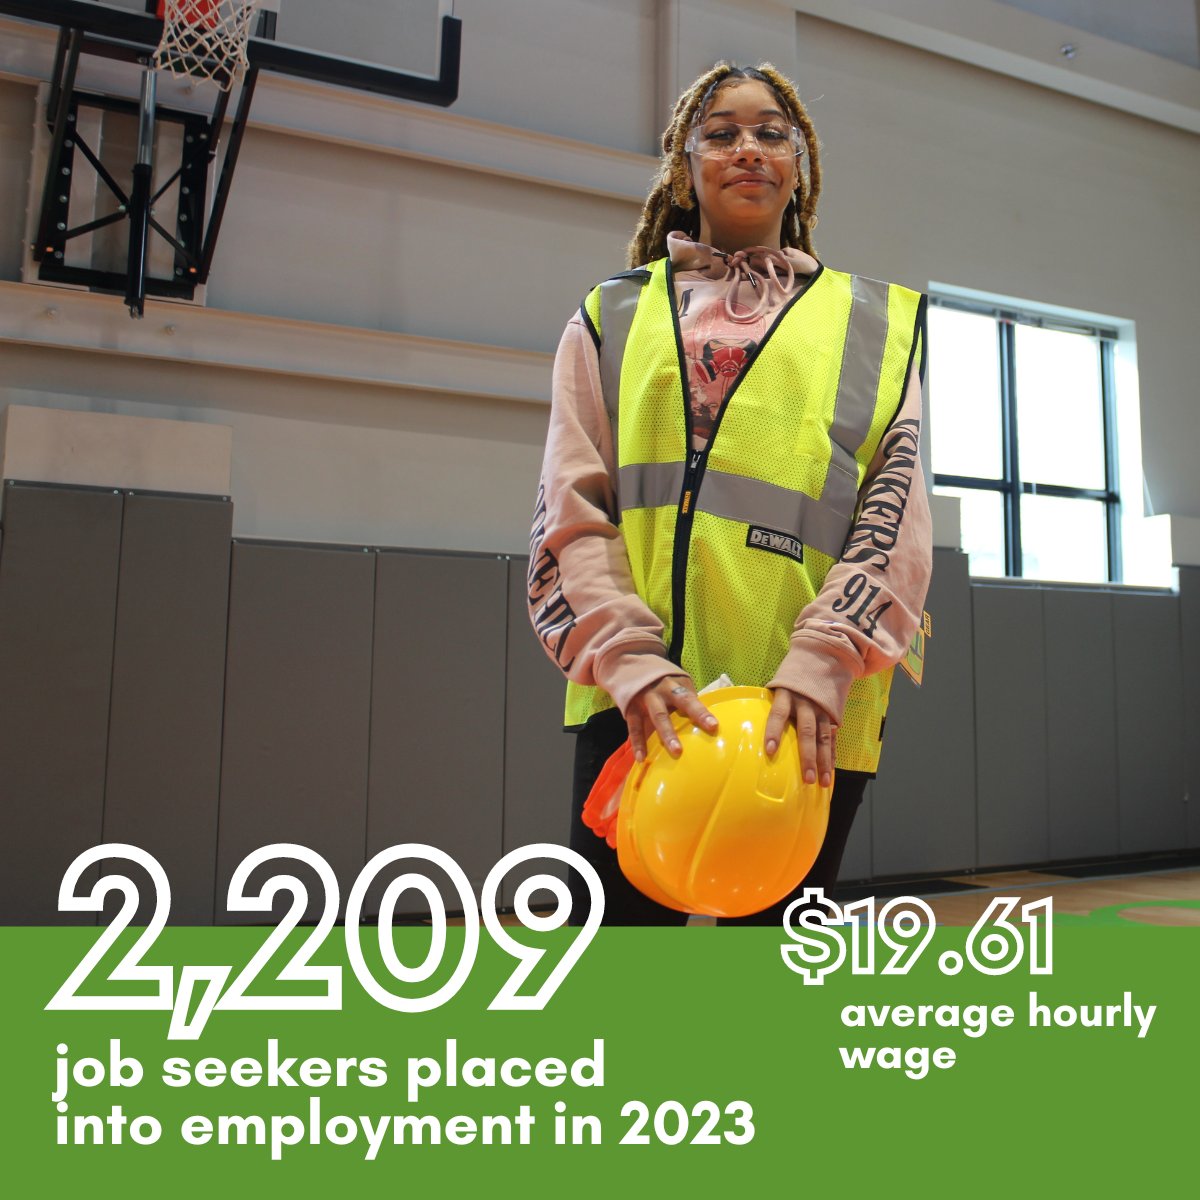 Breaking Records! In 2023, Westhab achieved our highest number of job placements EVER! 2,209 job seekers placed into employment at an hourly rate of $19.61! Here's to building brighter futures together! #BuildingCommunities #ChangingLives